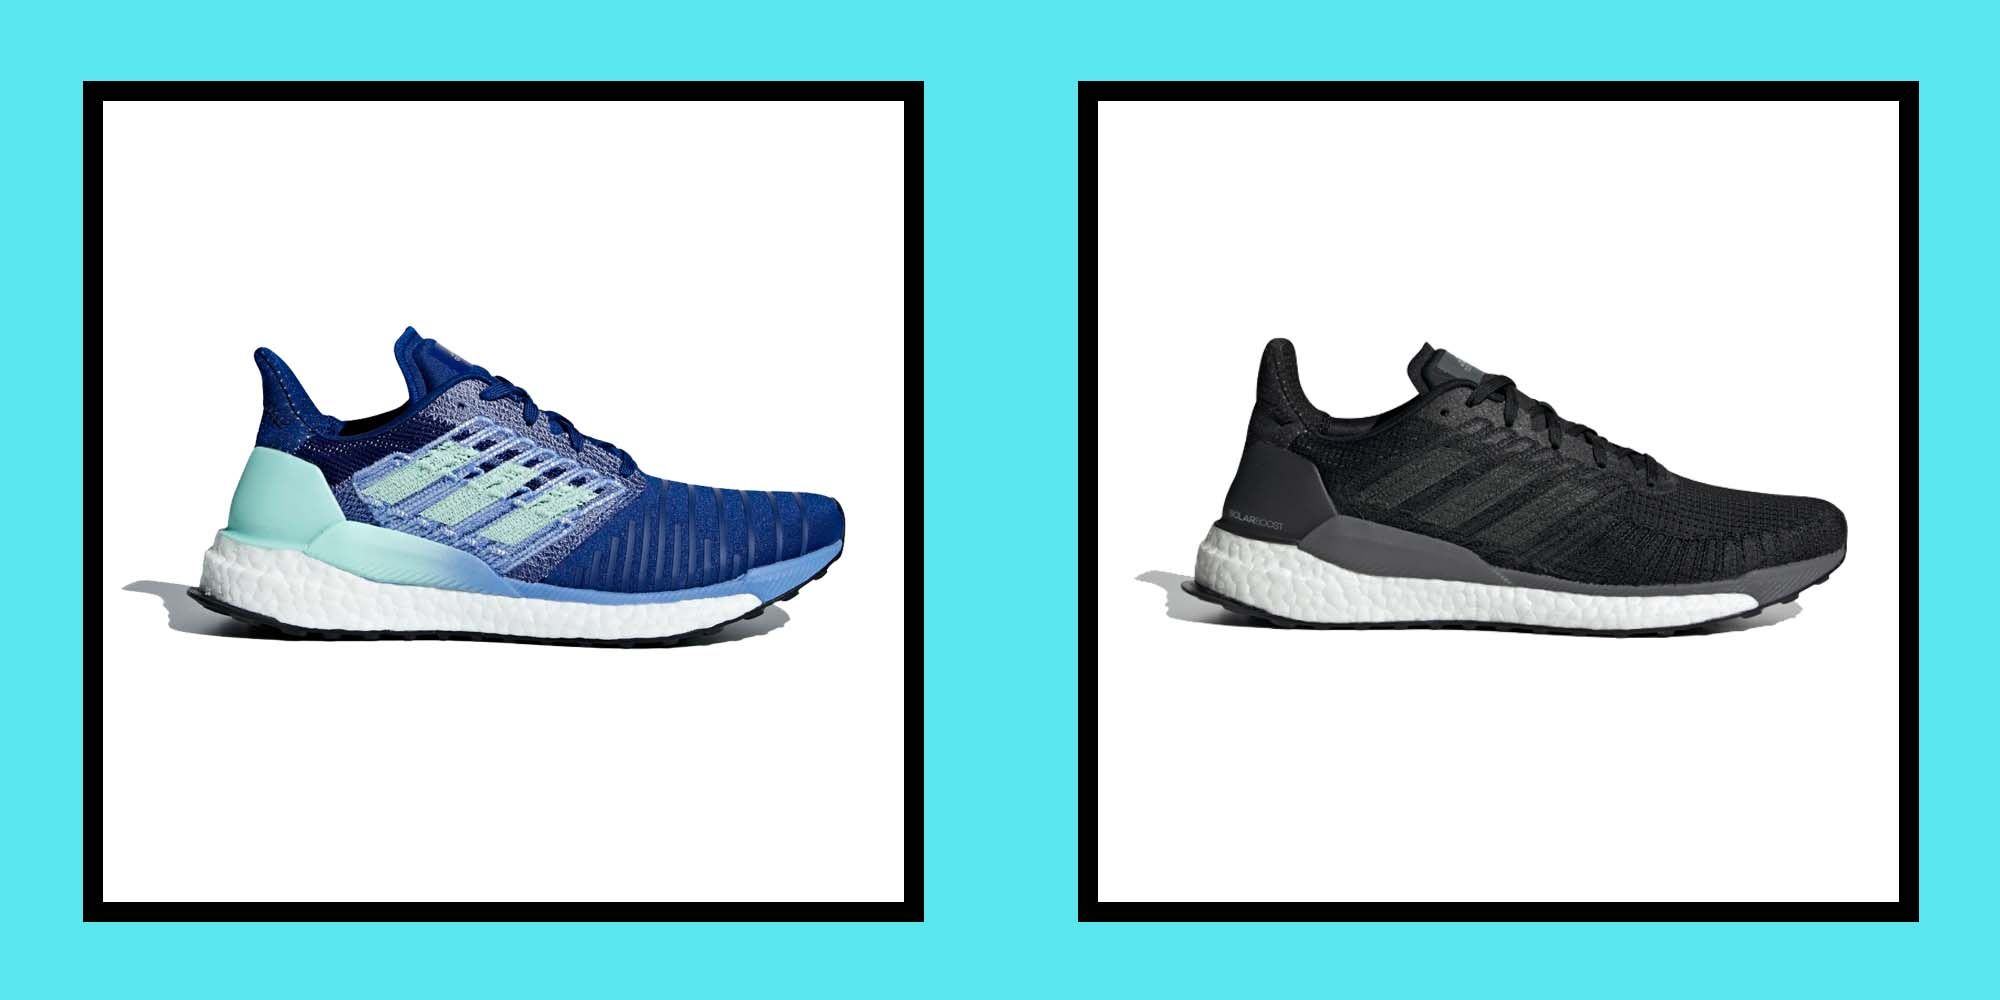 These adidas running shoes have 50% off 